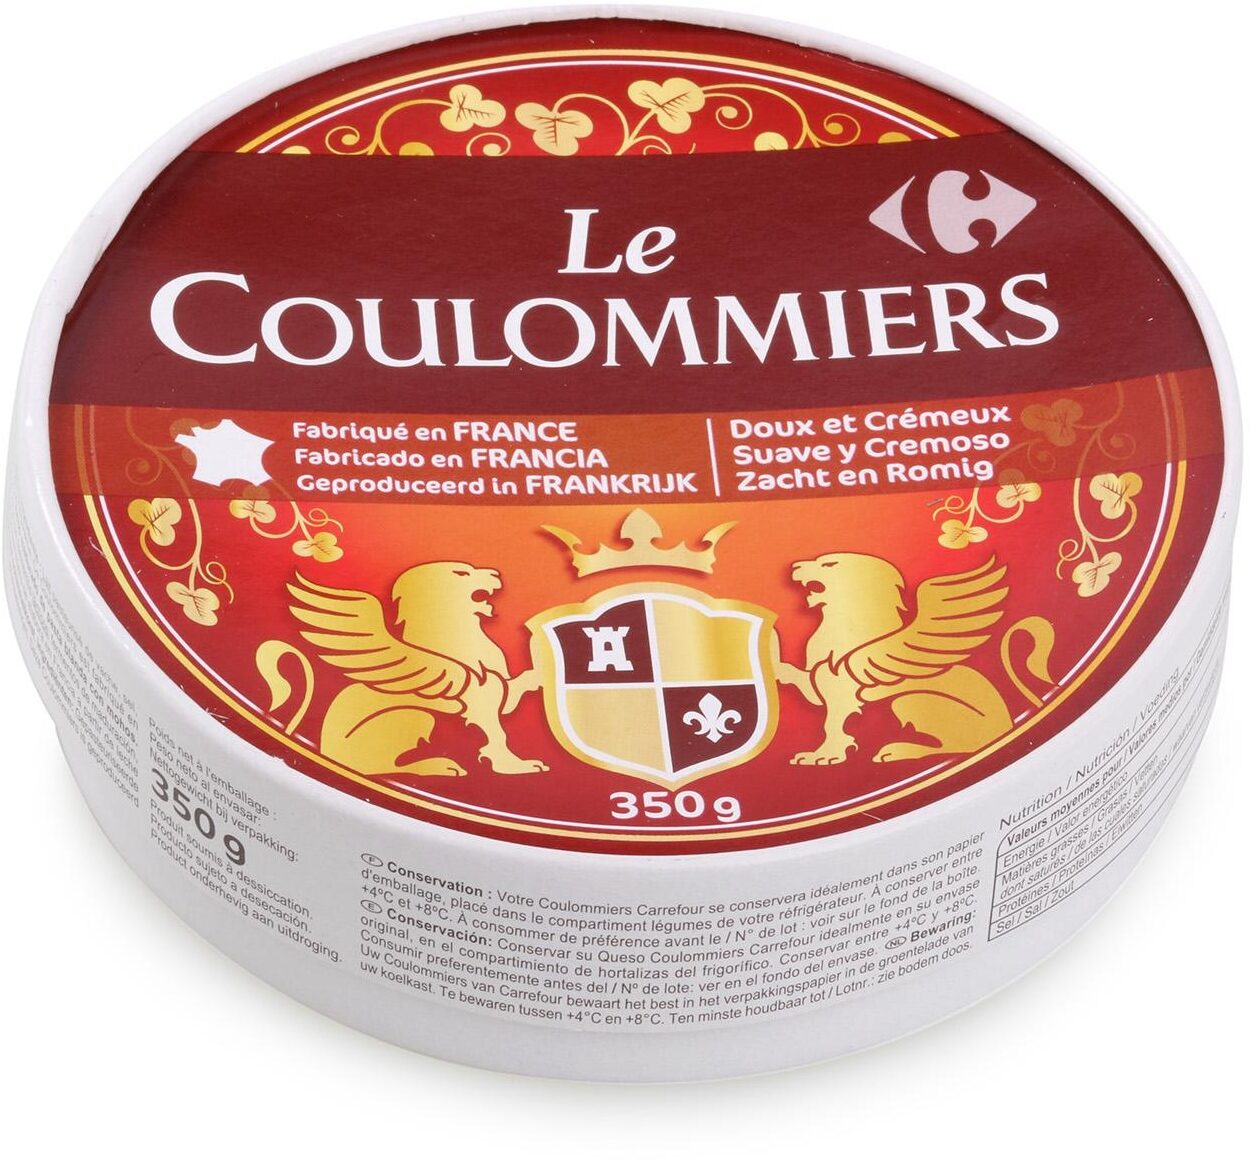 Le Coulommiers - Producto